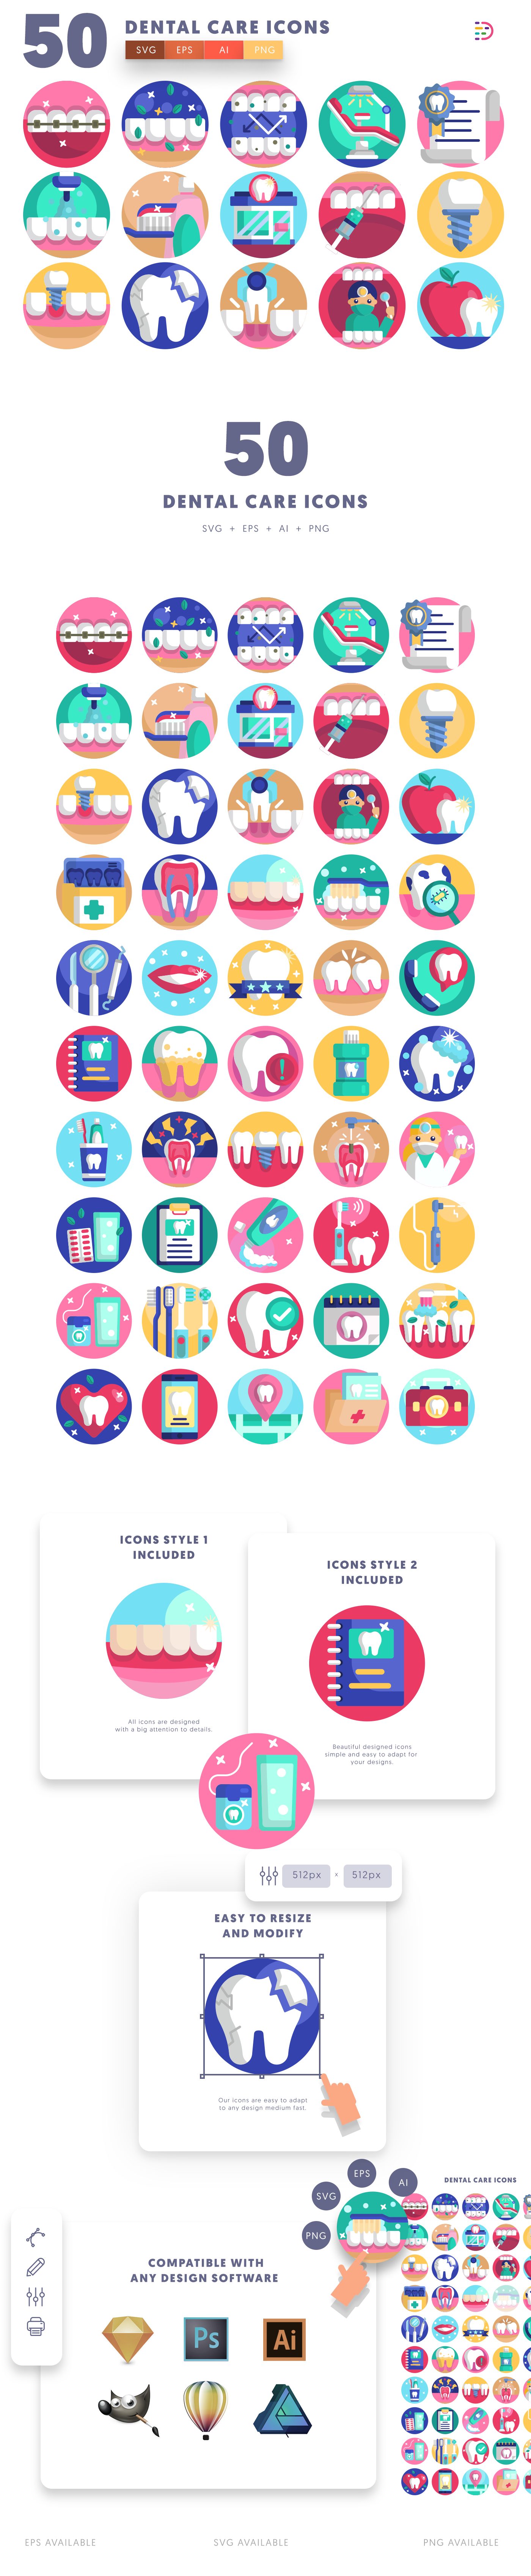 Dental Care icons info graphic